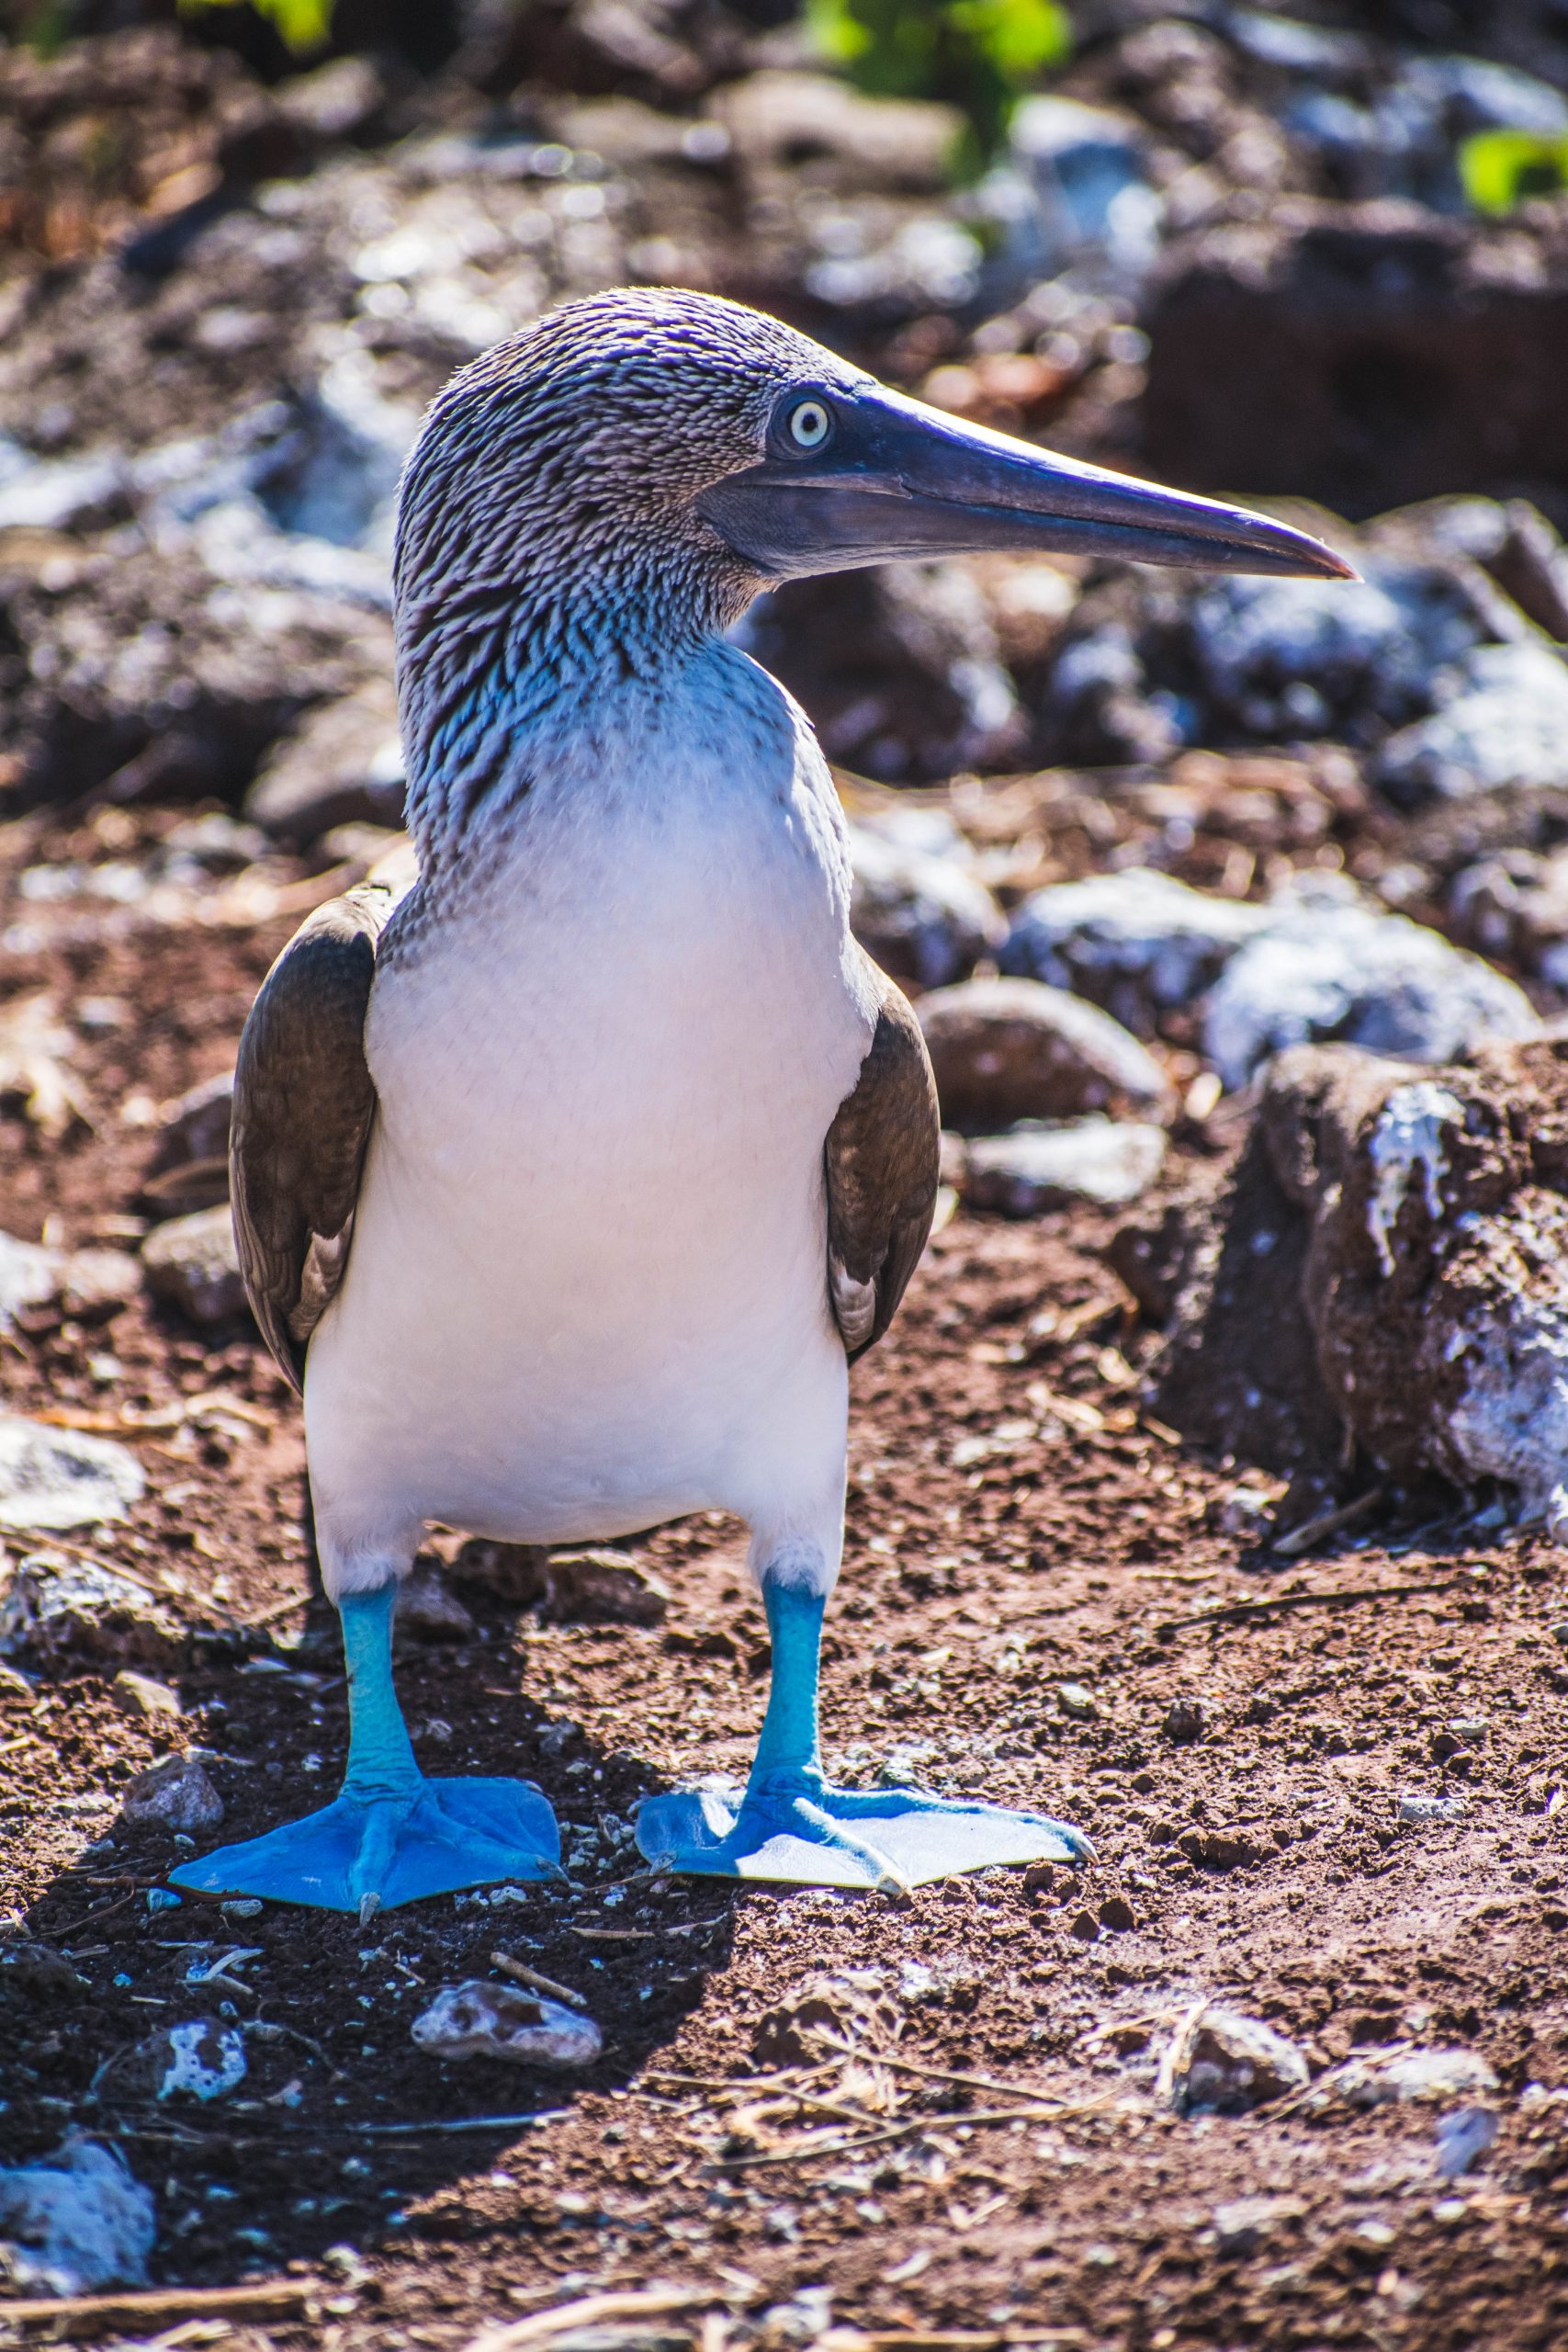 Blue footed booby - bird with blue feet, white chest, gray head, wings and beak.